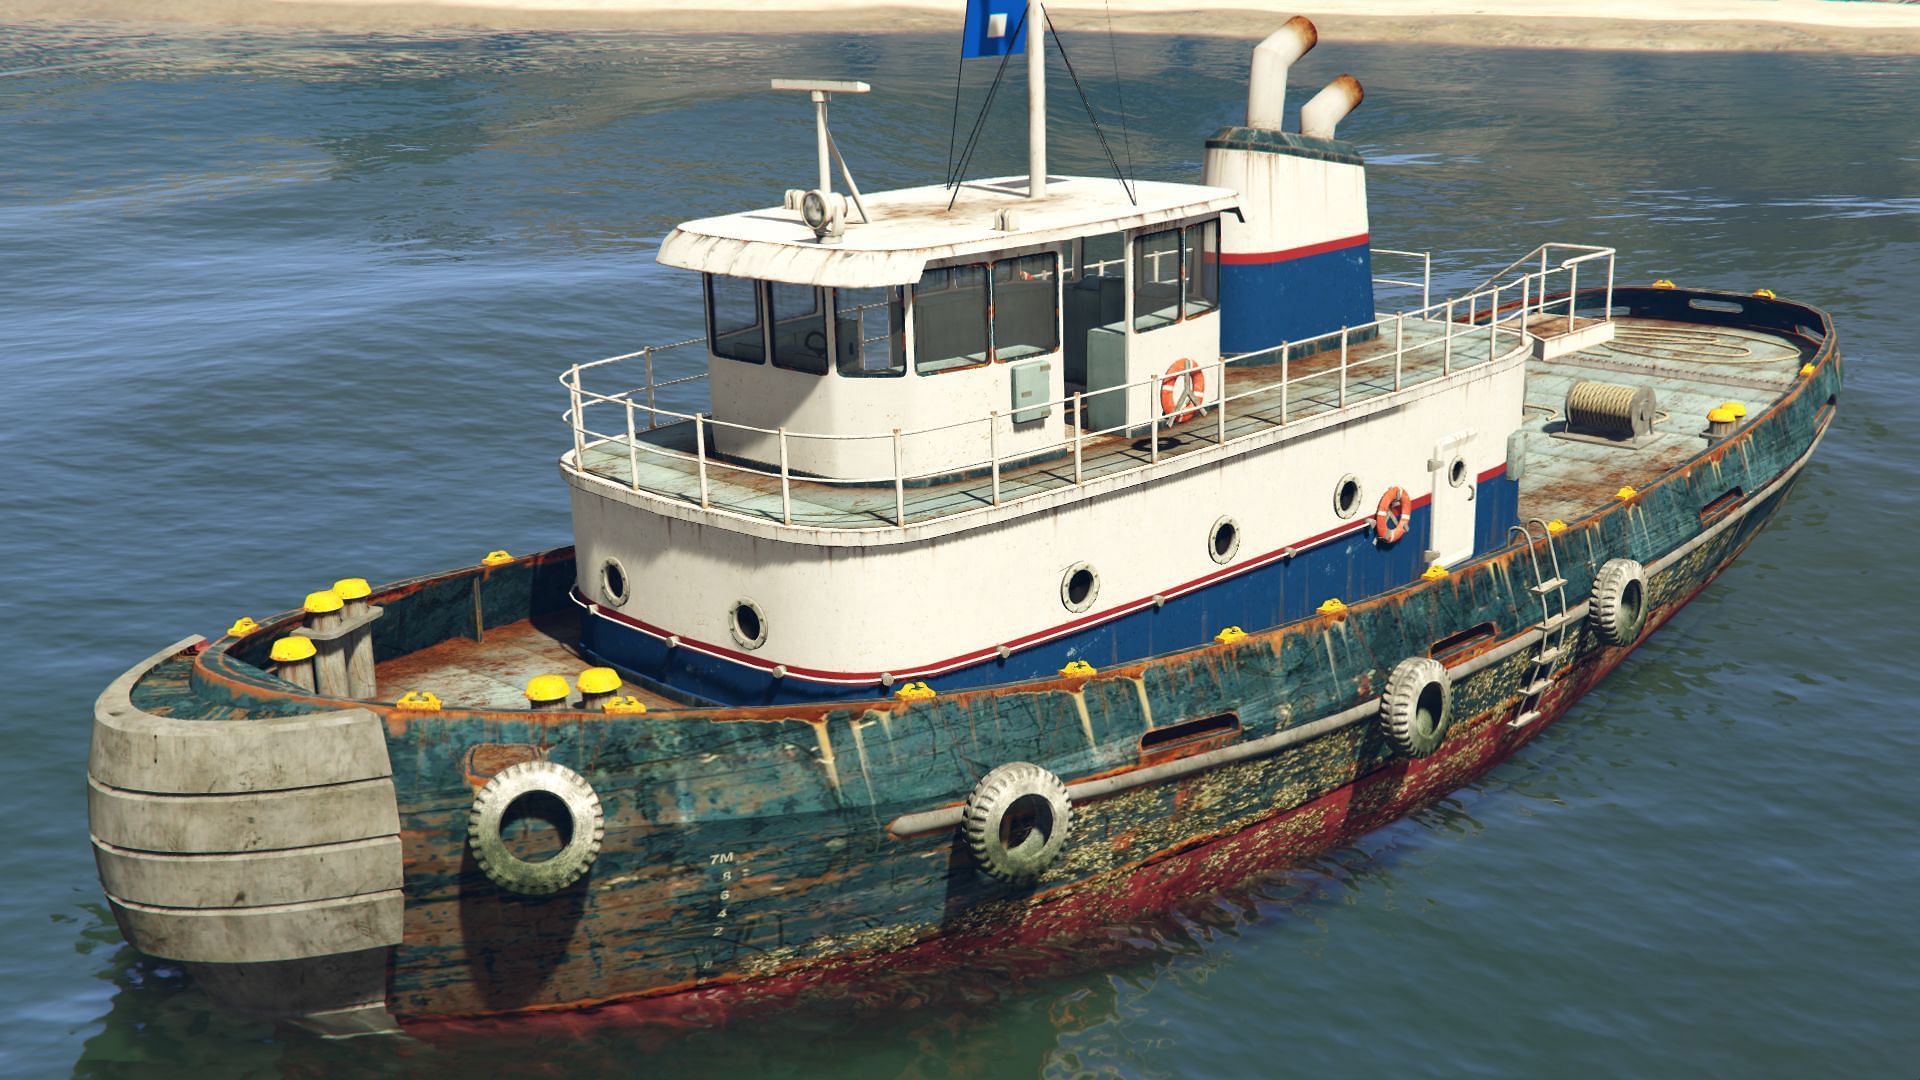 The Tug costs $1,250,000, yet it offers nothing of value for that high cost (Image via Rockstar Games)